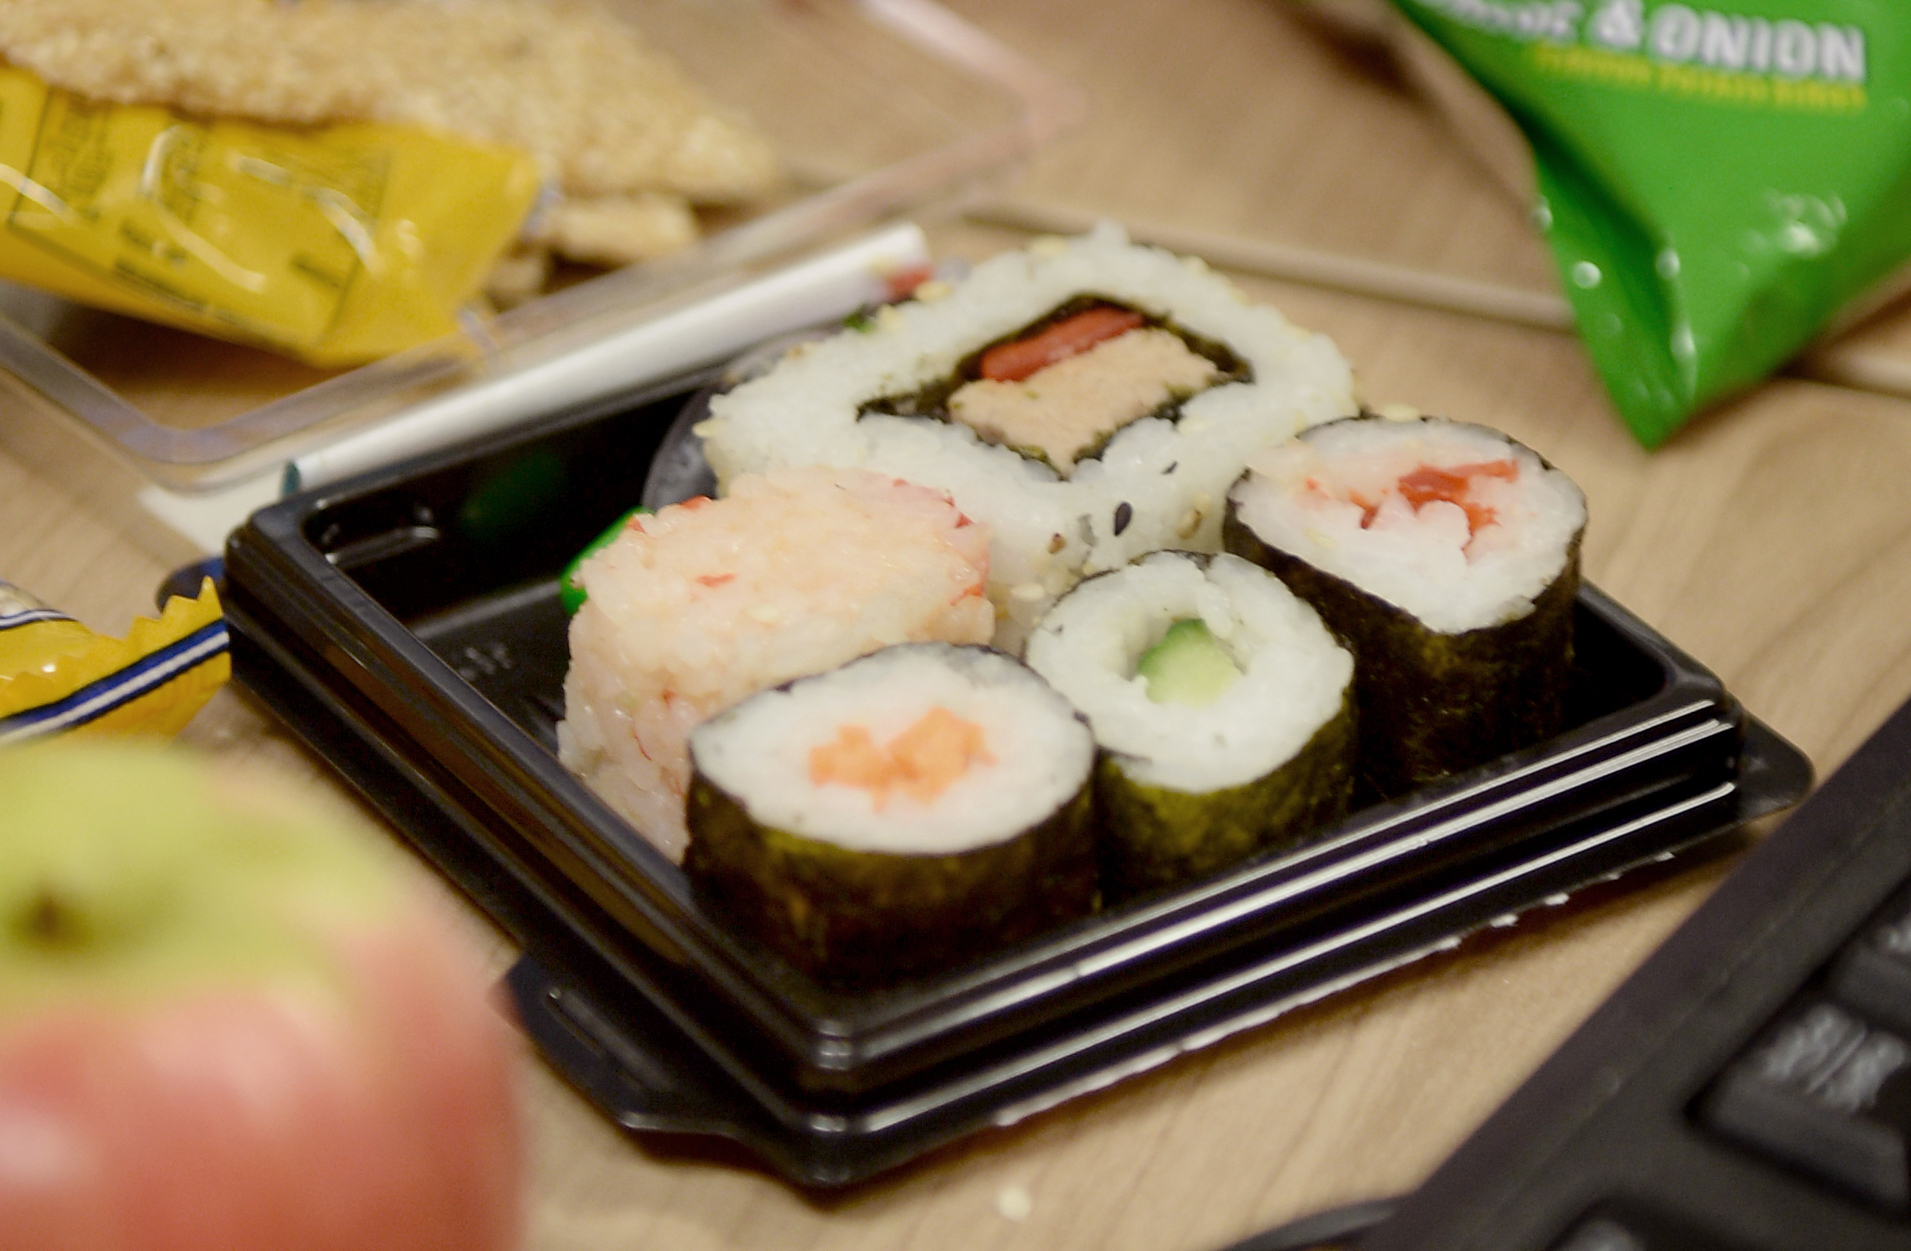 Doctors said the growing popularity of sushi in the West is linked to a rise in parasitic infections. (Anthony Devlin/PA Wire)